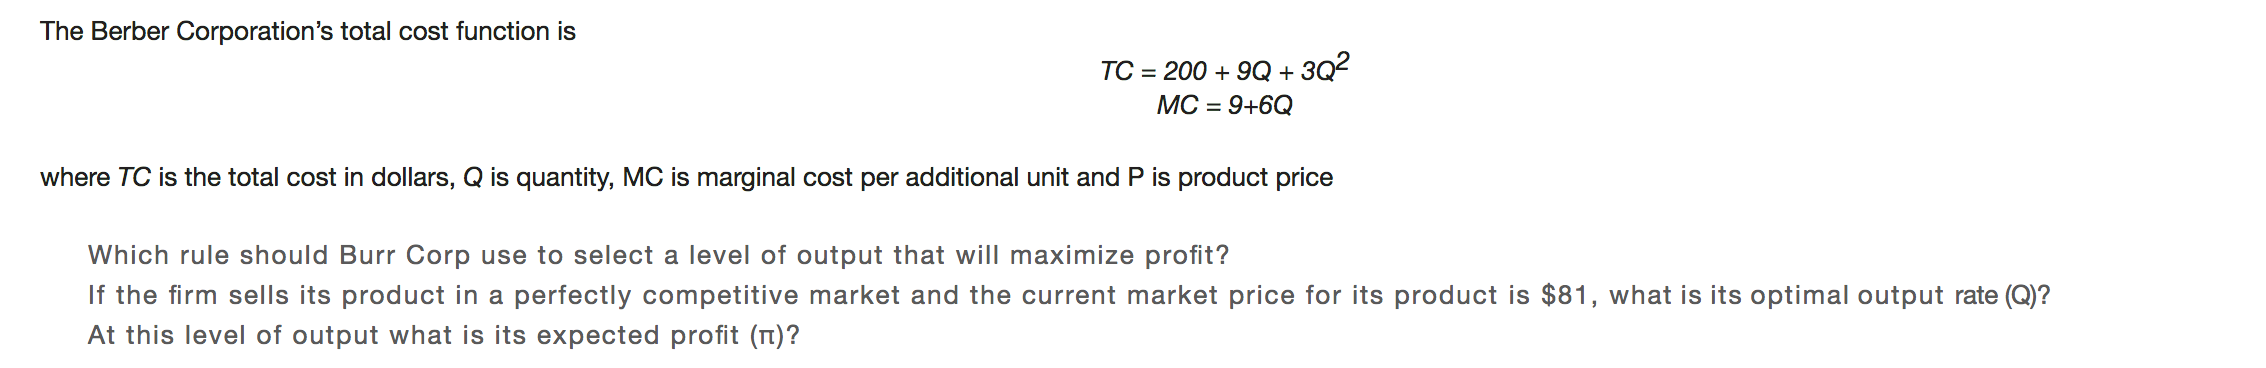 The Berber Corporation's total cost function is
200 9Q3Q2
МС - 9+6Q
ТC
where TC is the total cost in dollars, Q is quantity, MC is marginal cost per additional unit and P is product price
Which rule should Burr Corp use to select a level of output that will maximize profit?
If the firm sells its product in a perfectly competitive market and the current market price for its product is $81, what is its optimal output rate (Q)?
At this level of output what is its expected profit (n)?
